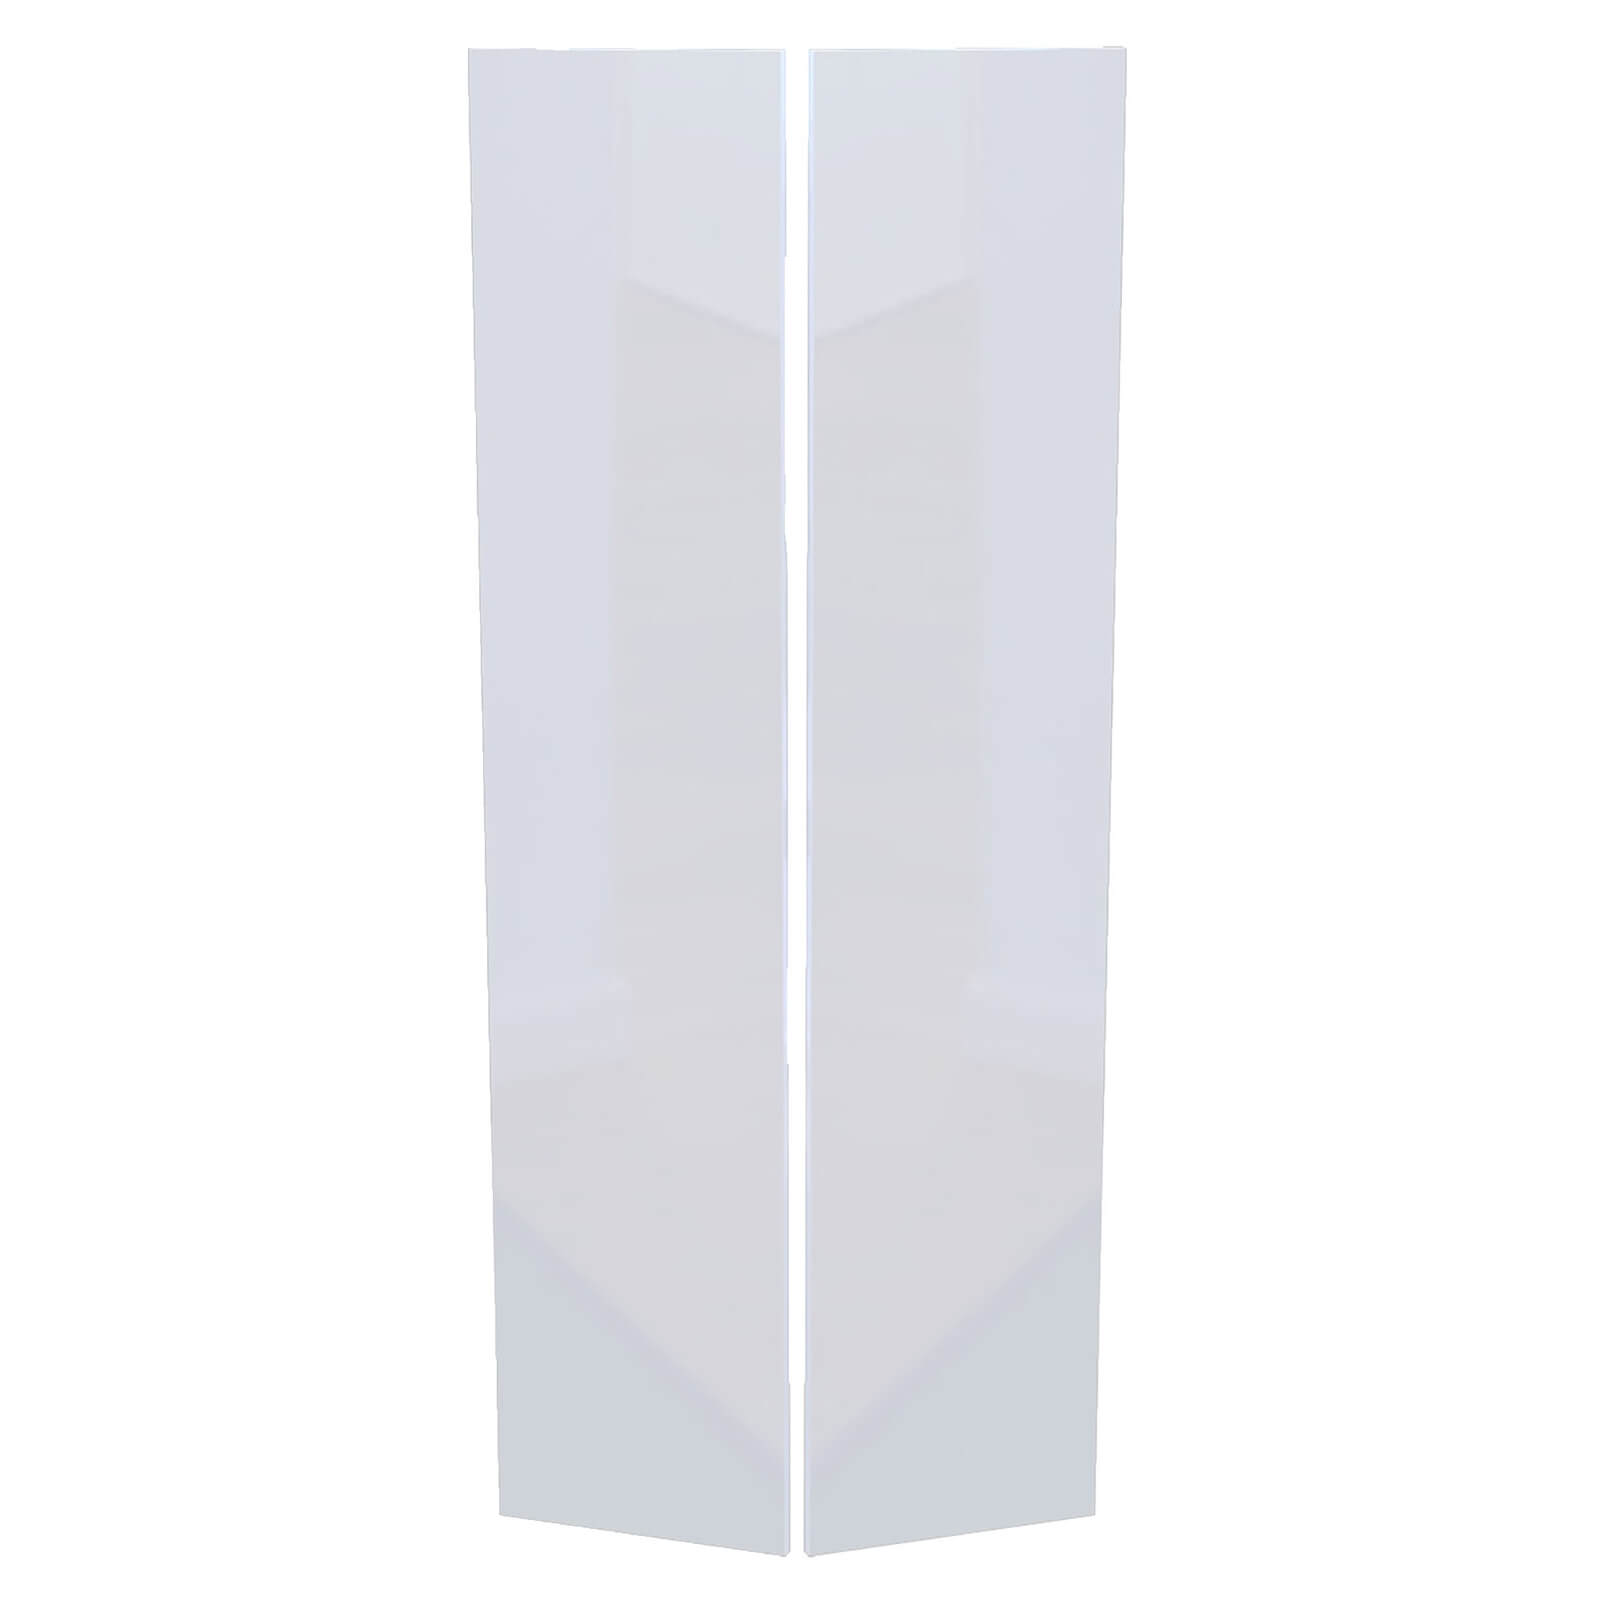 Fitted Bedroom Slab Double Wardrobe Doors - White